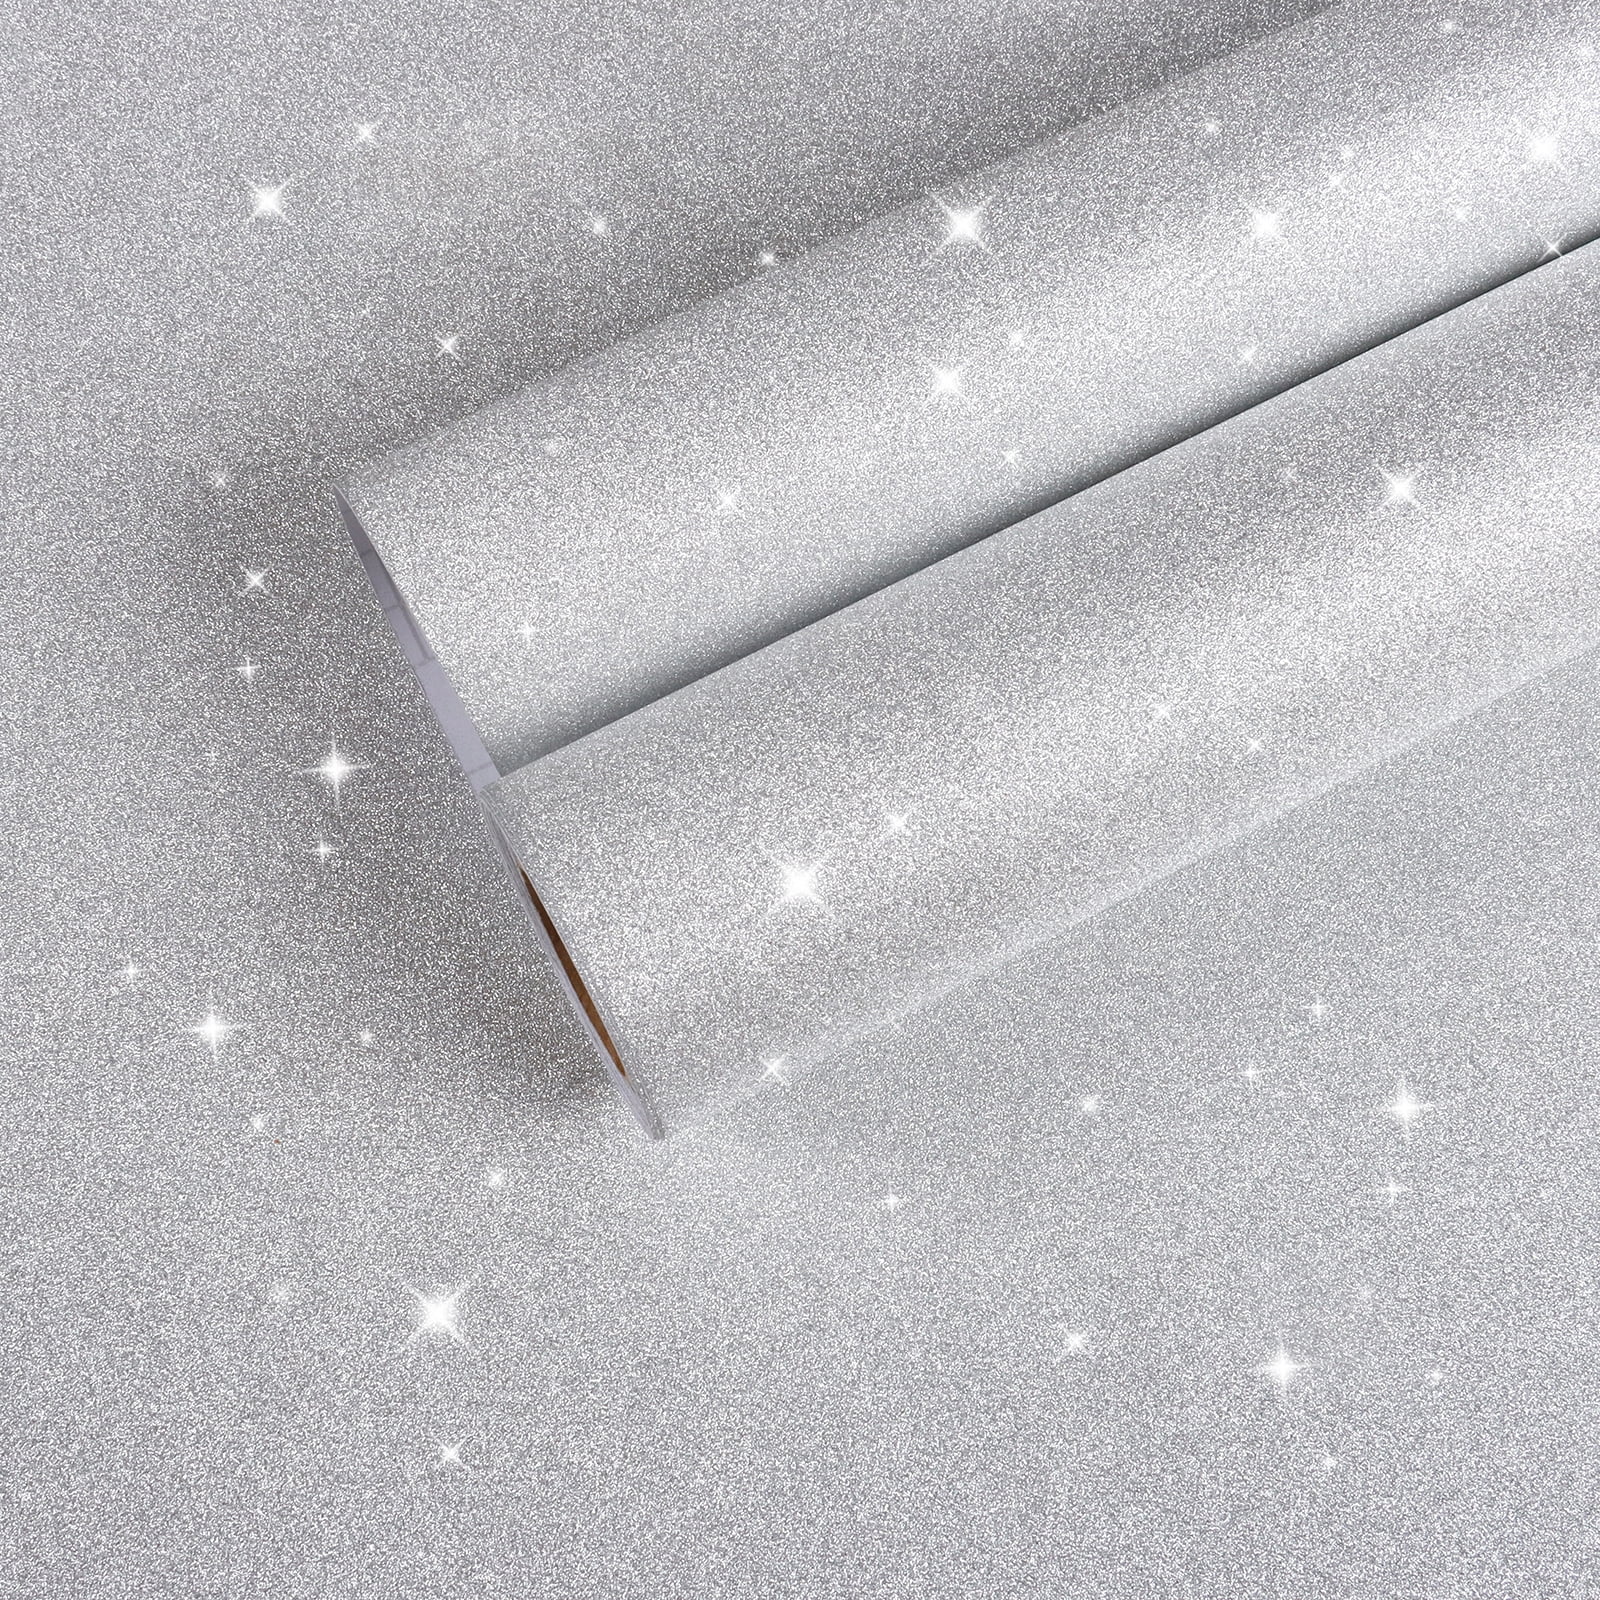 VEELIKE 15.7''x118'' Charcoal Holographic Glitter Wallpaper Stick and Peel  Removable Sparkle Grey Glitter Contact Paper Self Adhesive Glitter Fabric